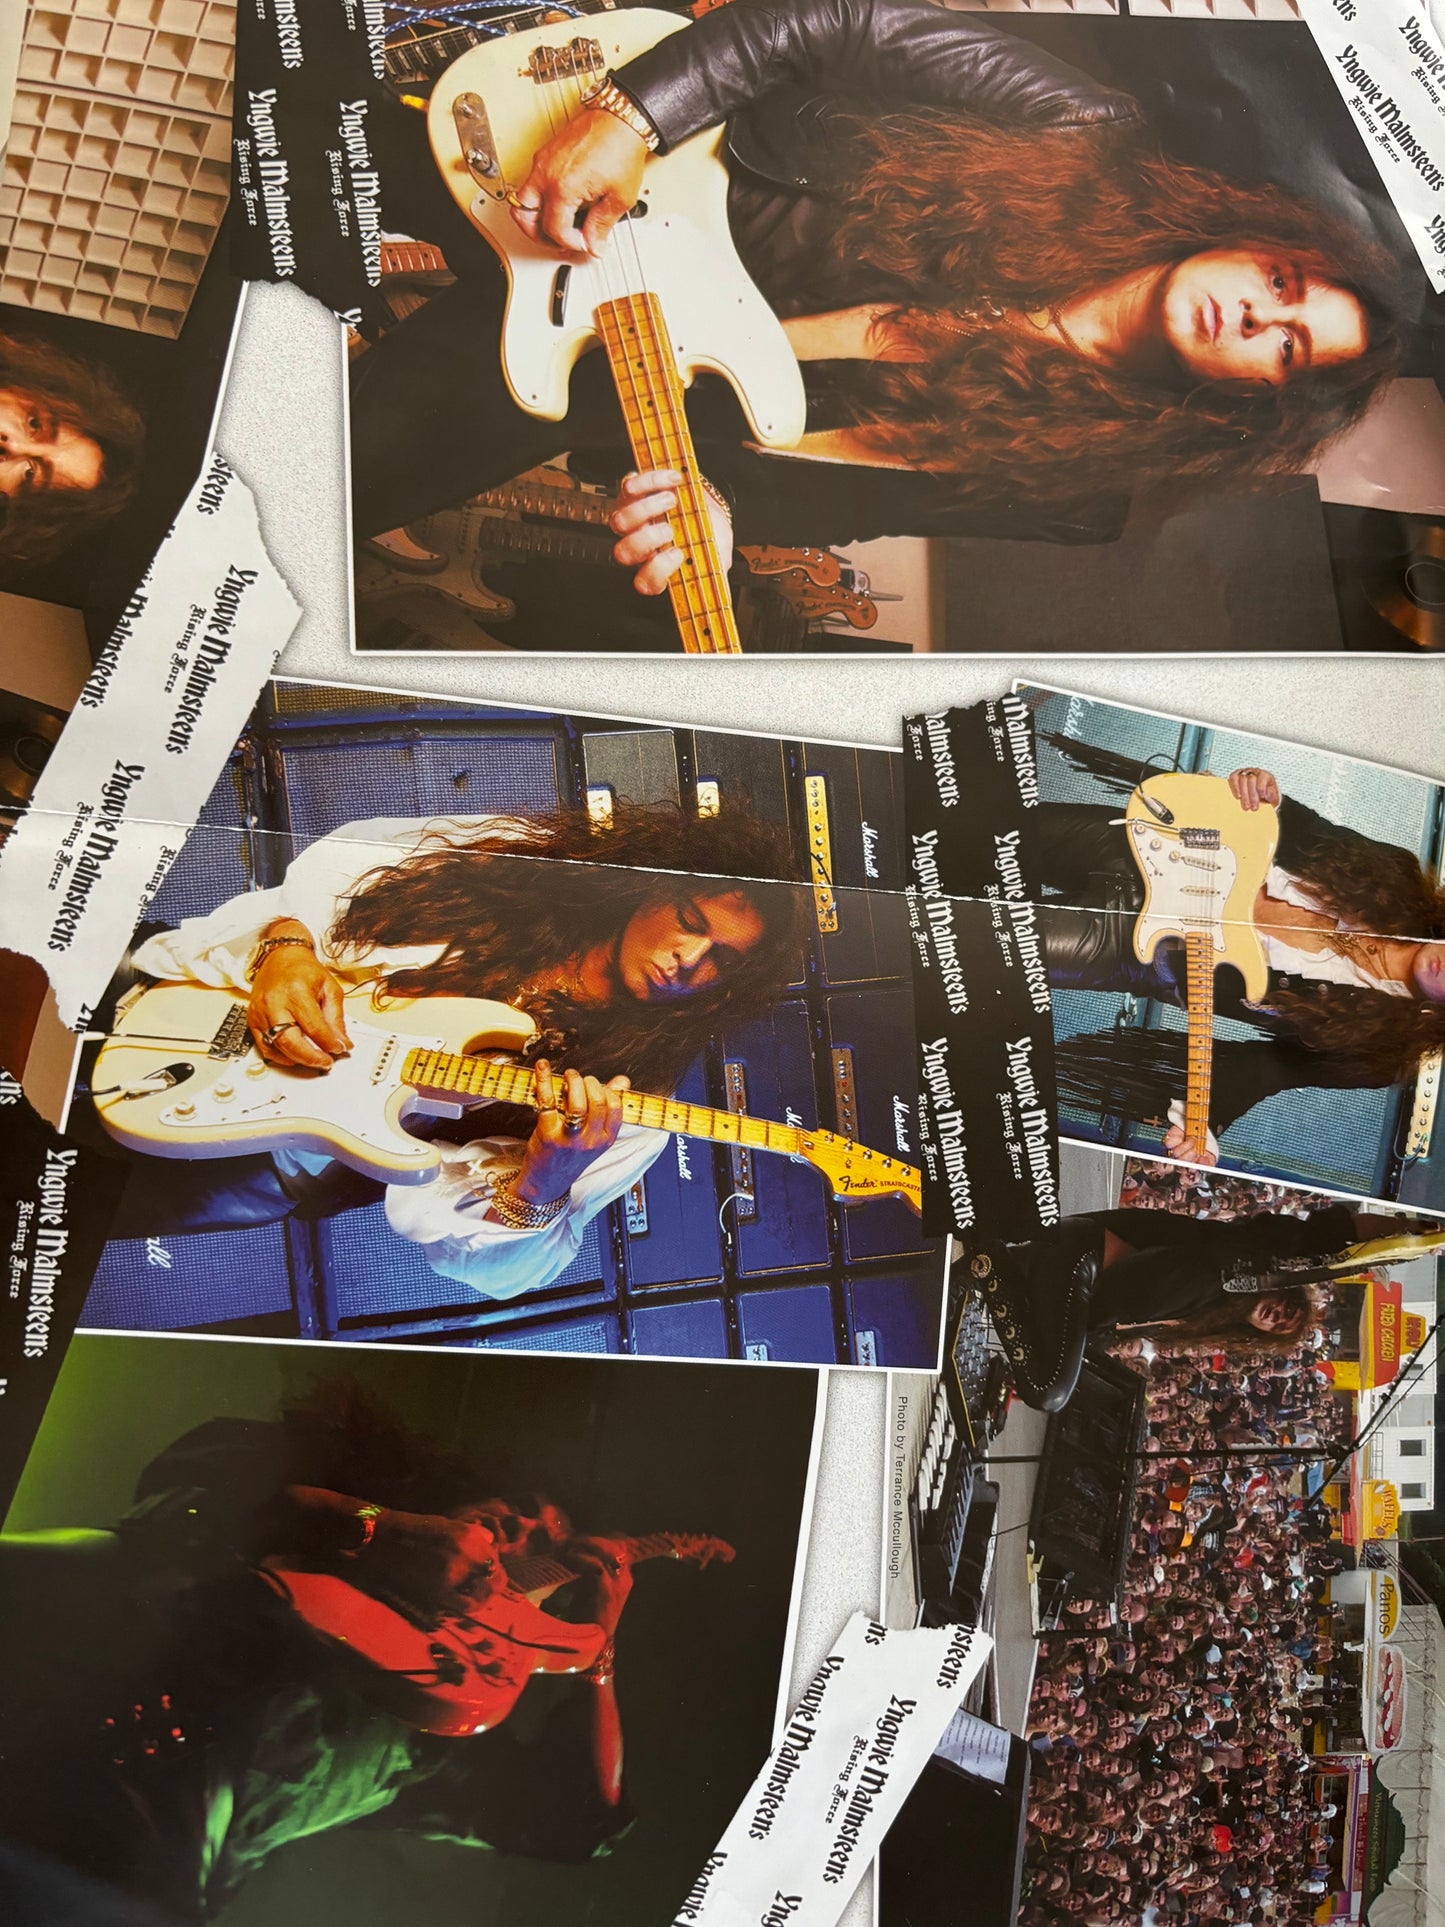 Yngwie Malmsteen Japan Tour 2005 Guide [Personally Signed]